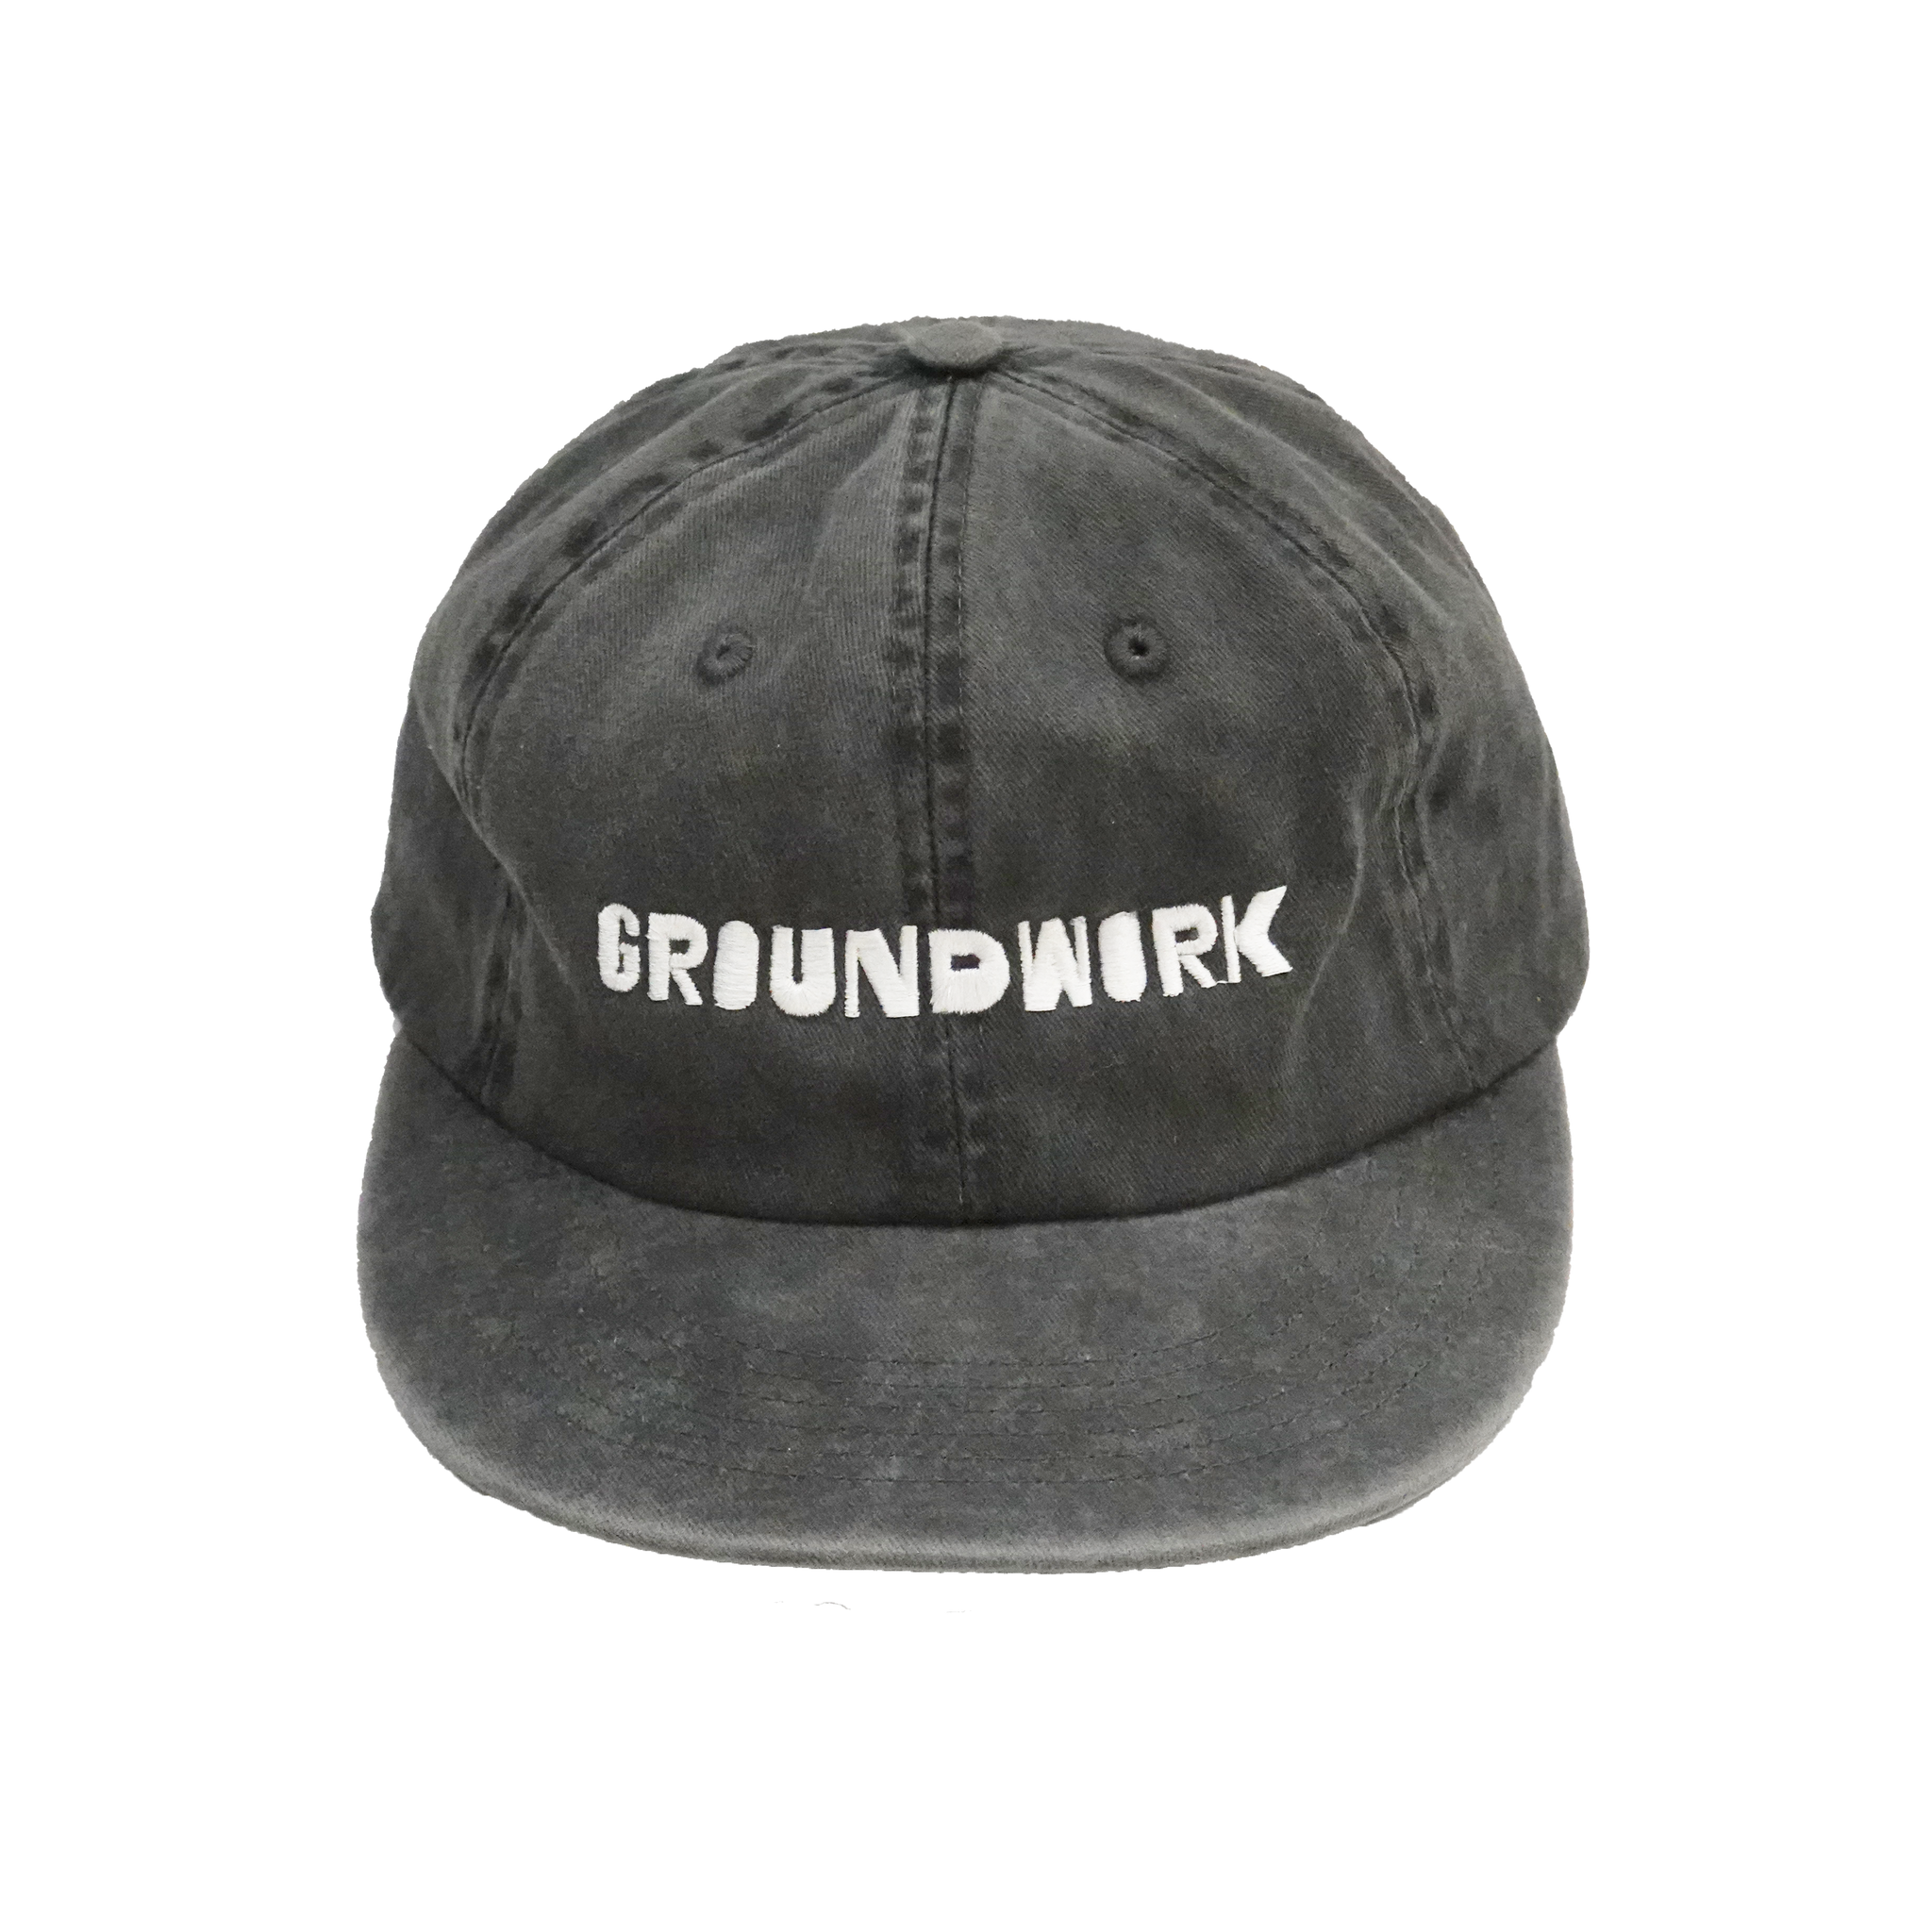 An unstructured 6-panel cotton hat with embroidered groundwork logo in white.